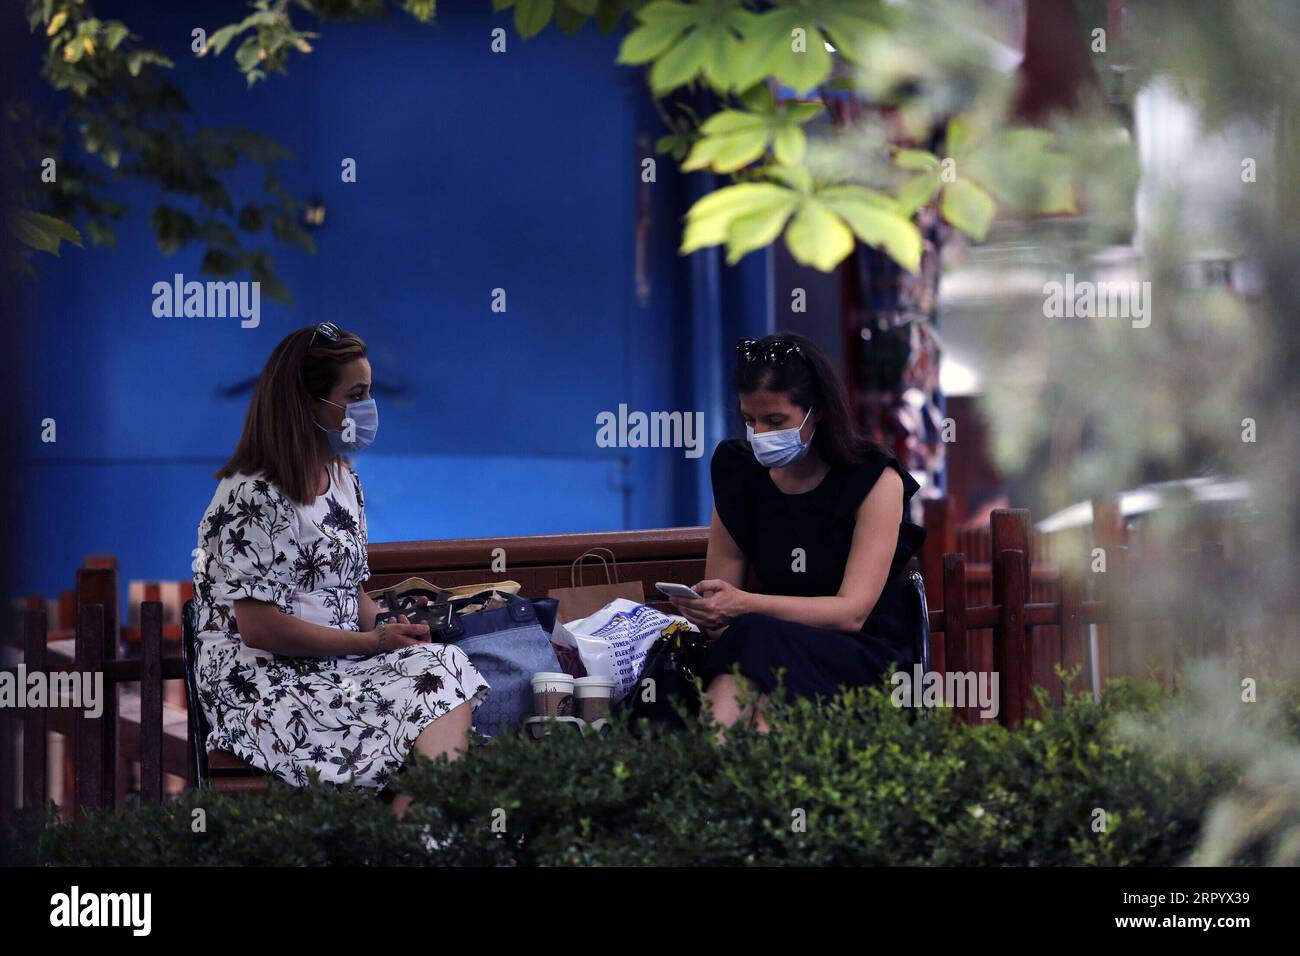 200717 -- ANKARA, July 17, 2020 -- Women wearing face masks sit on a bench in Ankara, Turkey, on July 17, 2020. Turkish Health Minister Fahrettin Koca on Friday warned of the increasing number of intensive care and intubated COVID-19 patients in the country. Turkey s daily coronavirus cases increased by 926 on Friday, raising the overall number to 217,799, the minister said. Photo by /Xinhua TURKEY-ANKARA-COVID-19-CASES MustafaxKaya PUBLICATIONxNOTxINxCHN Stock Photo